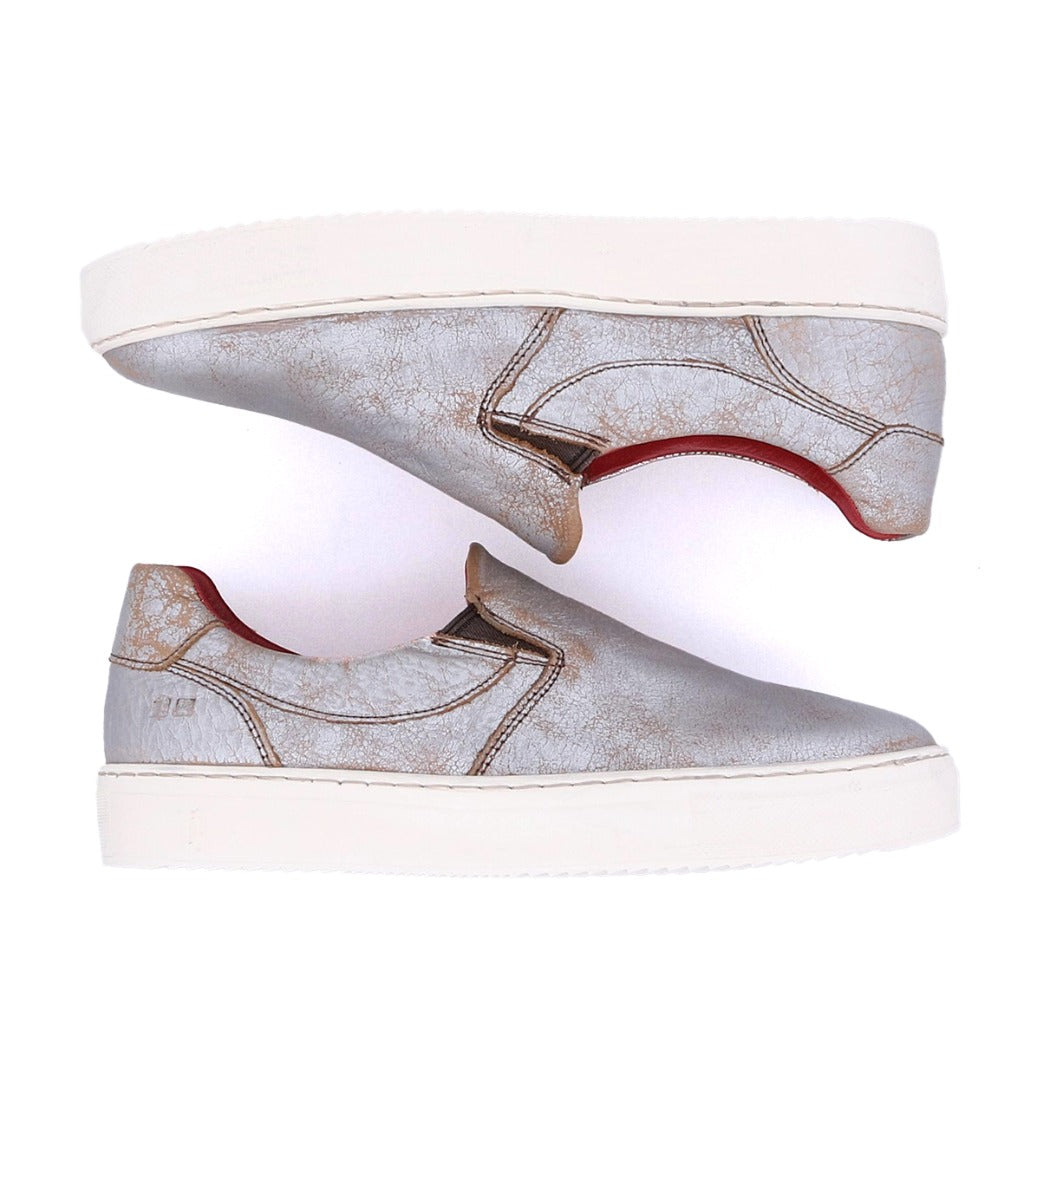 A pair of Hermione slip on sneakers with red soles made by Bed Stu.